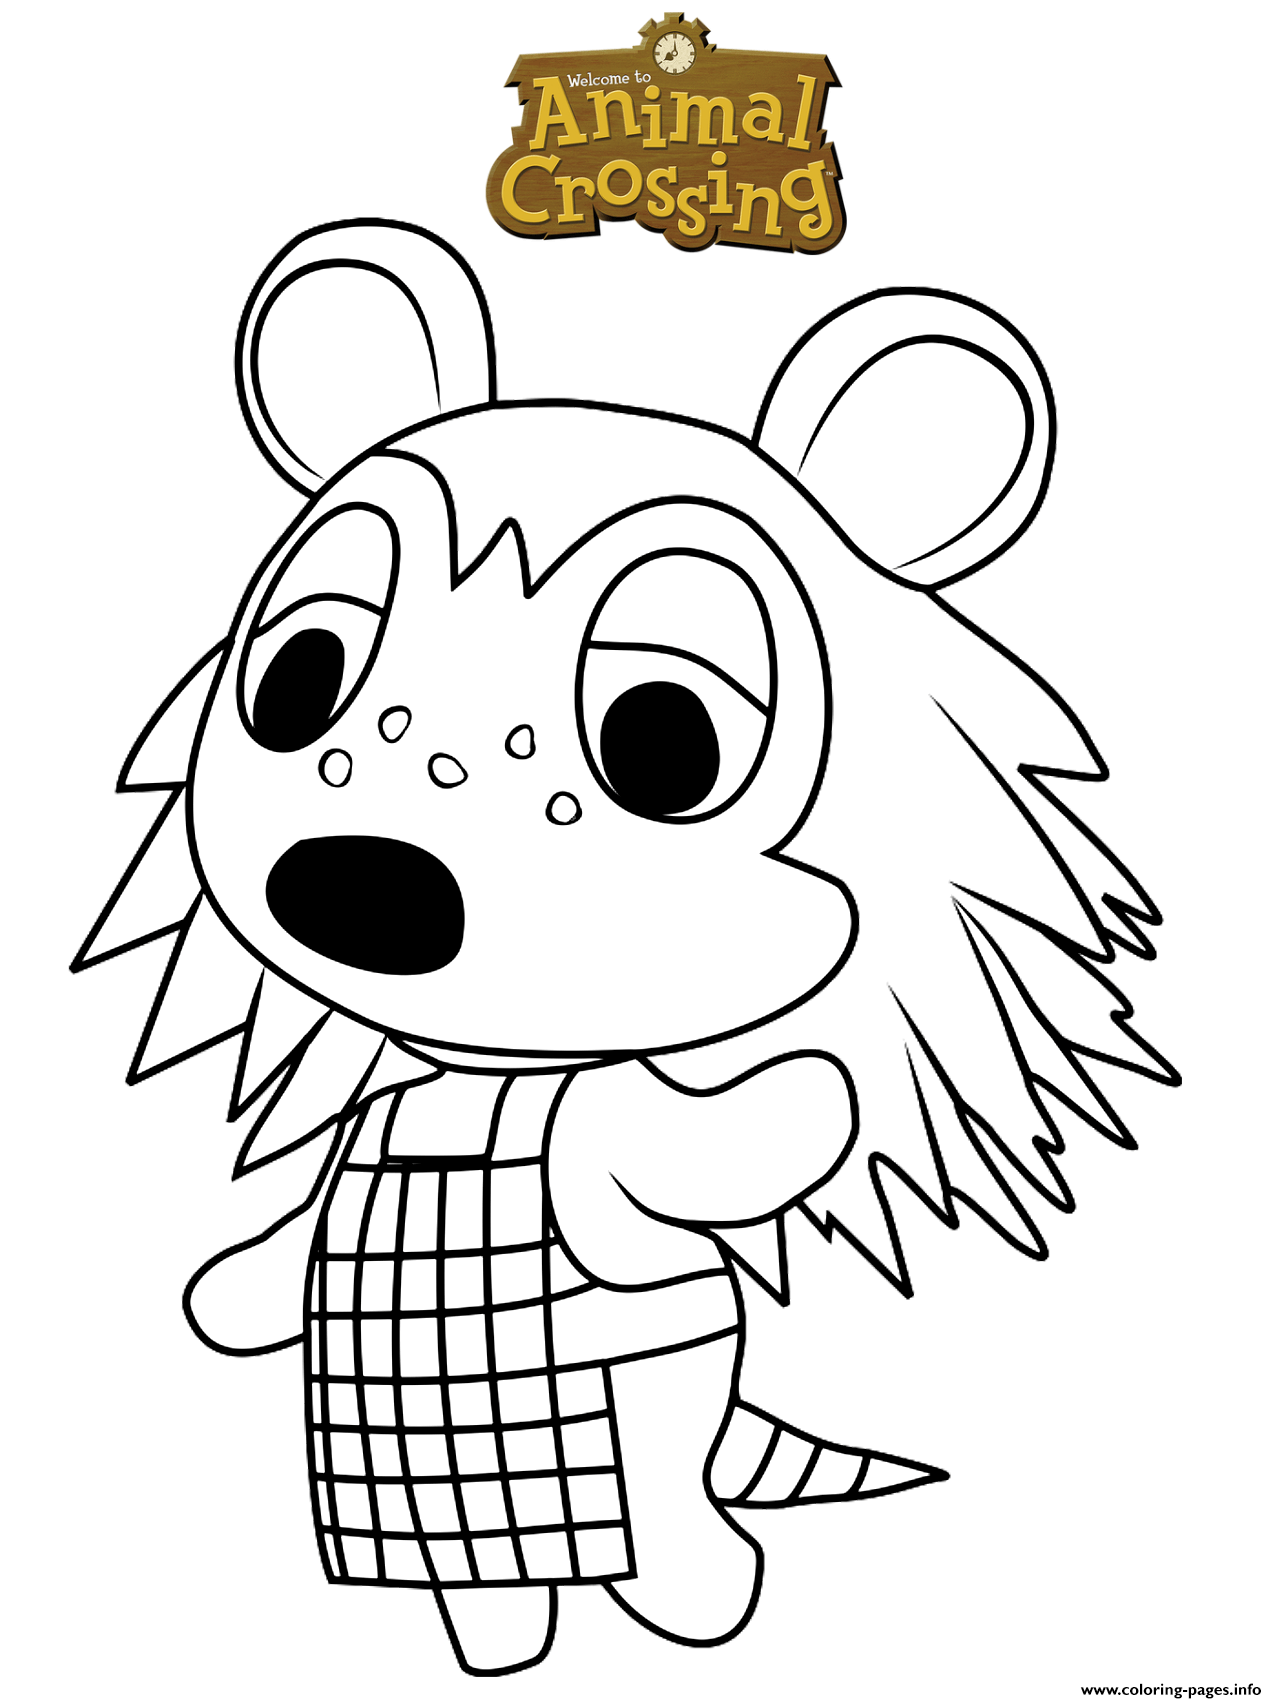 Animal Crossing Coloring Pages New Horizons : animal coloring page